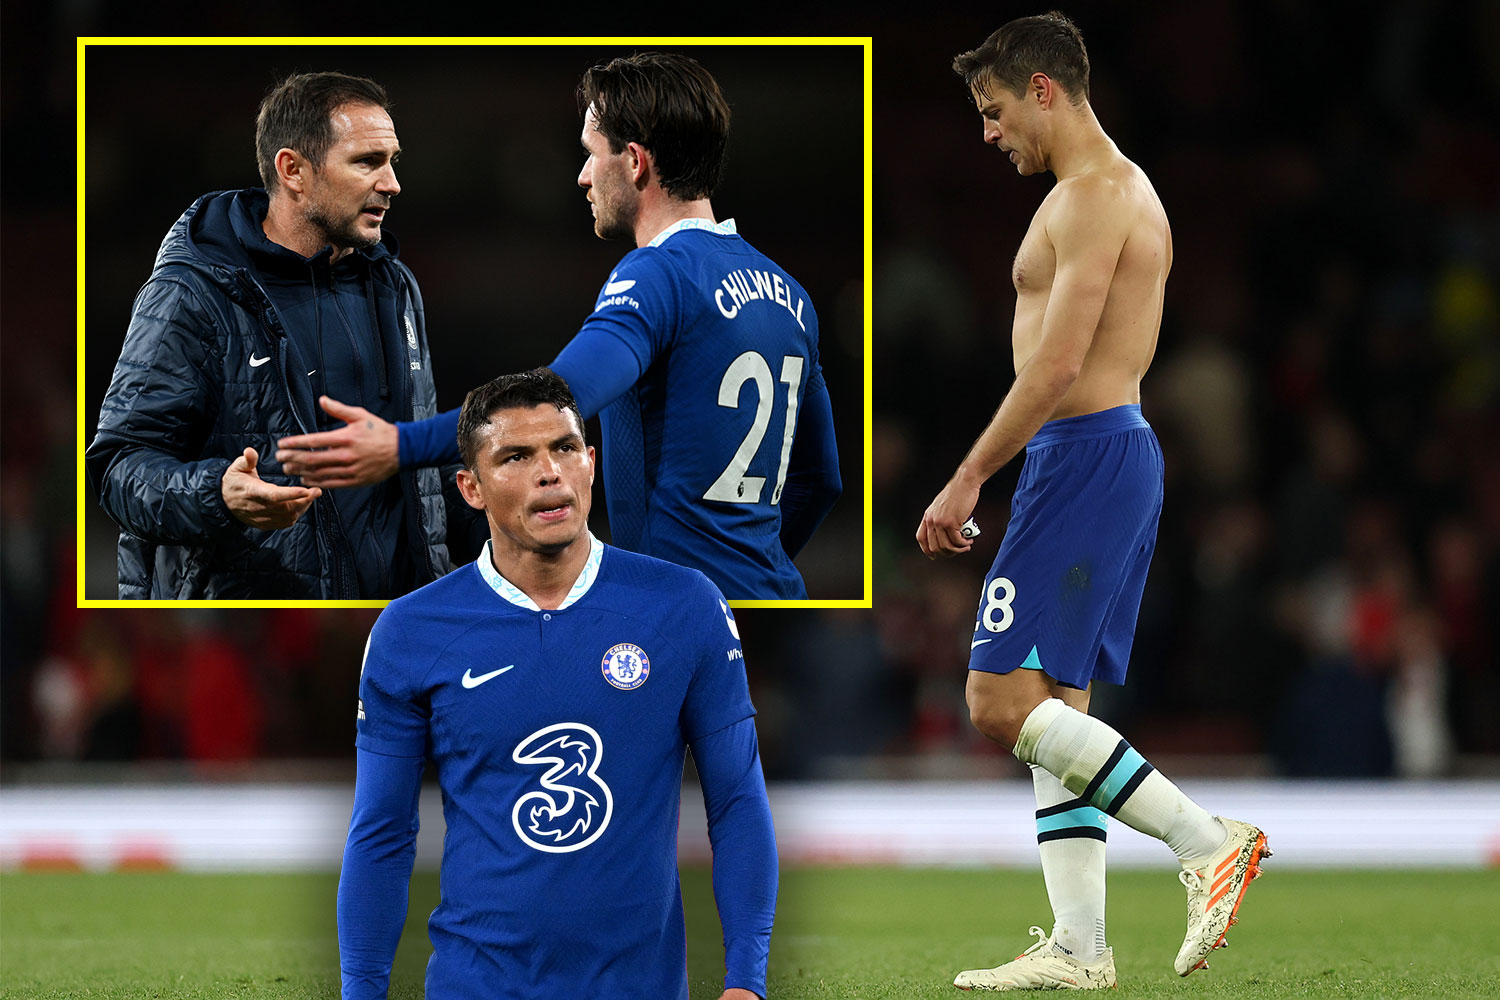 Frank Lampard says Chelsea are 'nice to play against in every way' as Jamie O'Hara jokes Jason Cundy should coach them